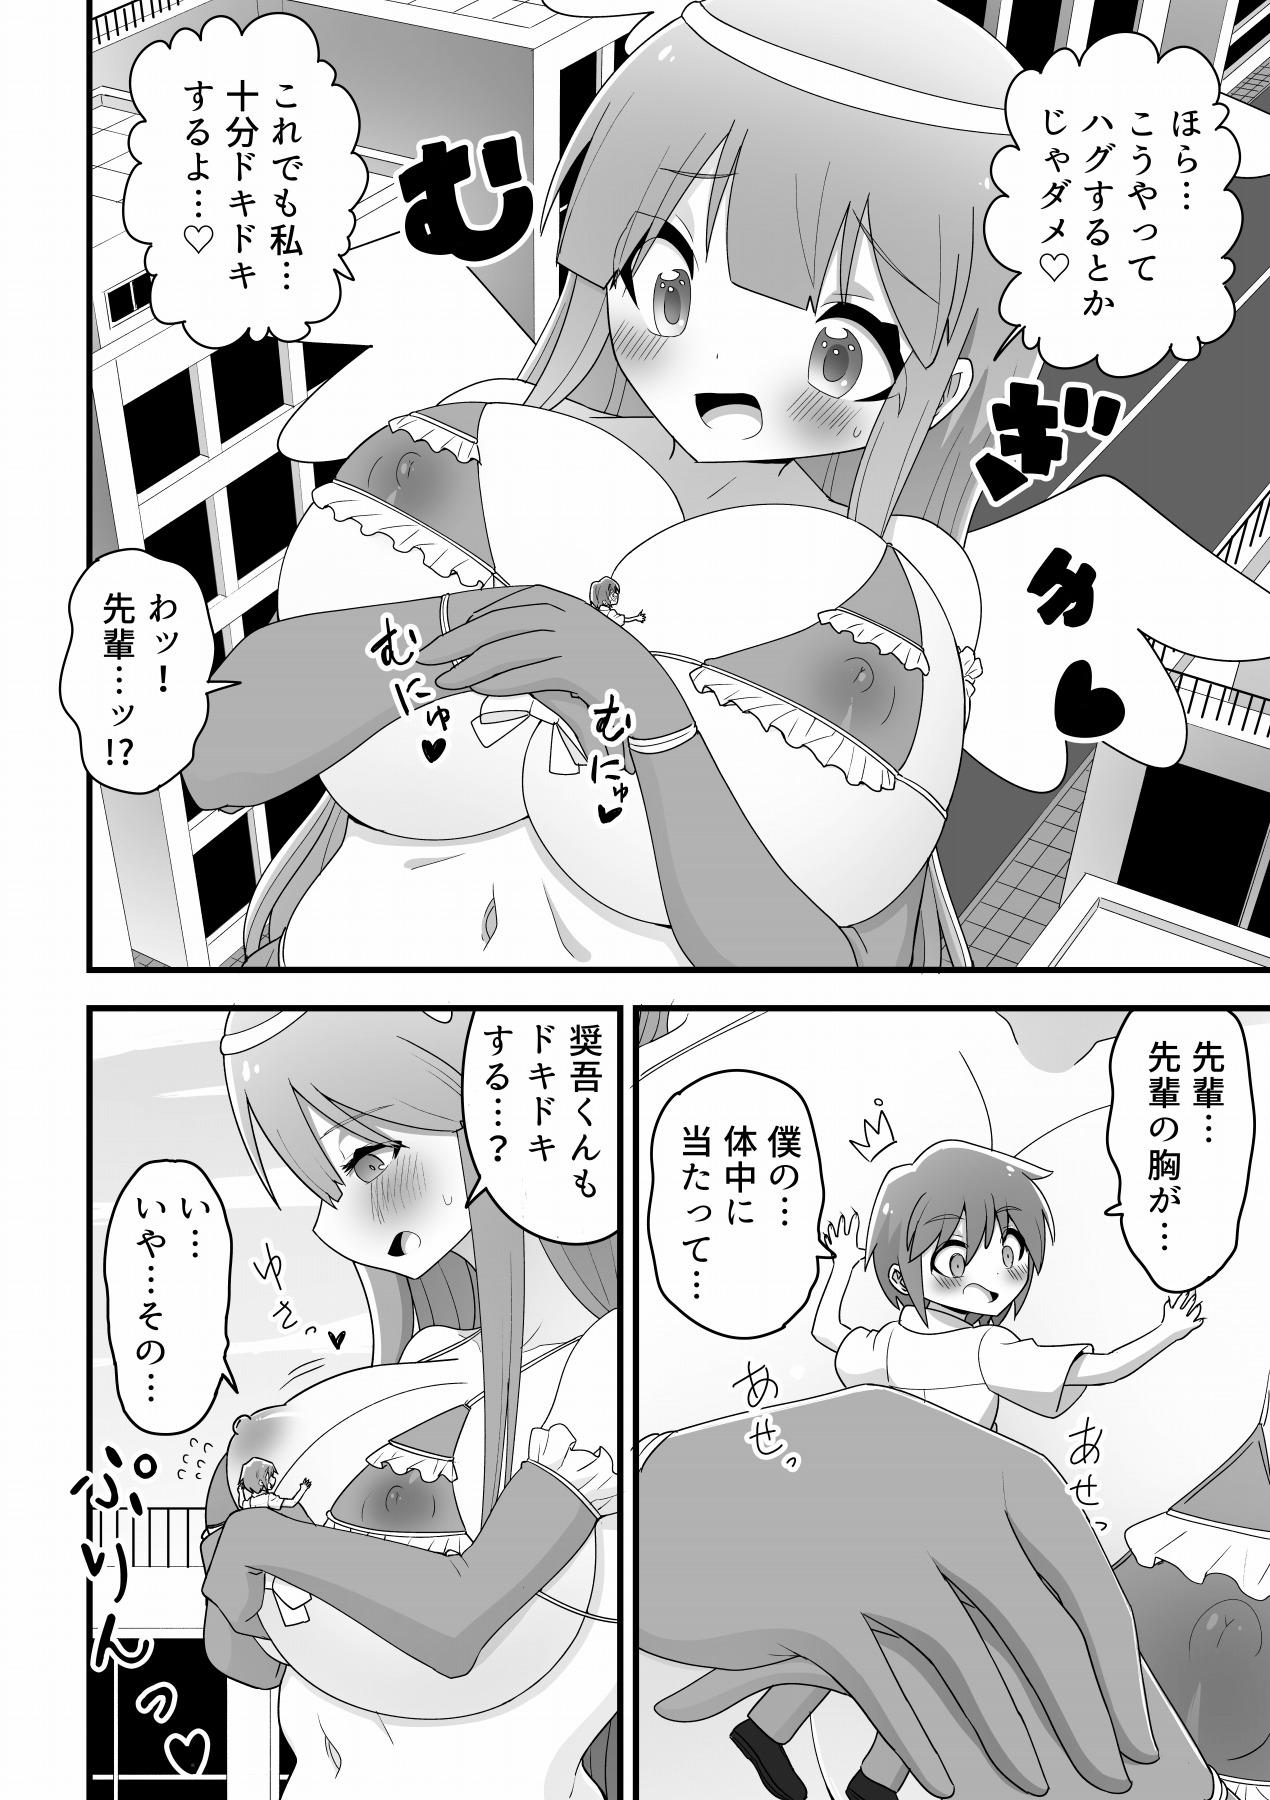 Argenta A story about an ordinary school girl becoming a giant magical girl and having sex with a junior boy to save the world - Original Free Petite Porn - Page 8